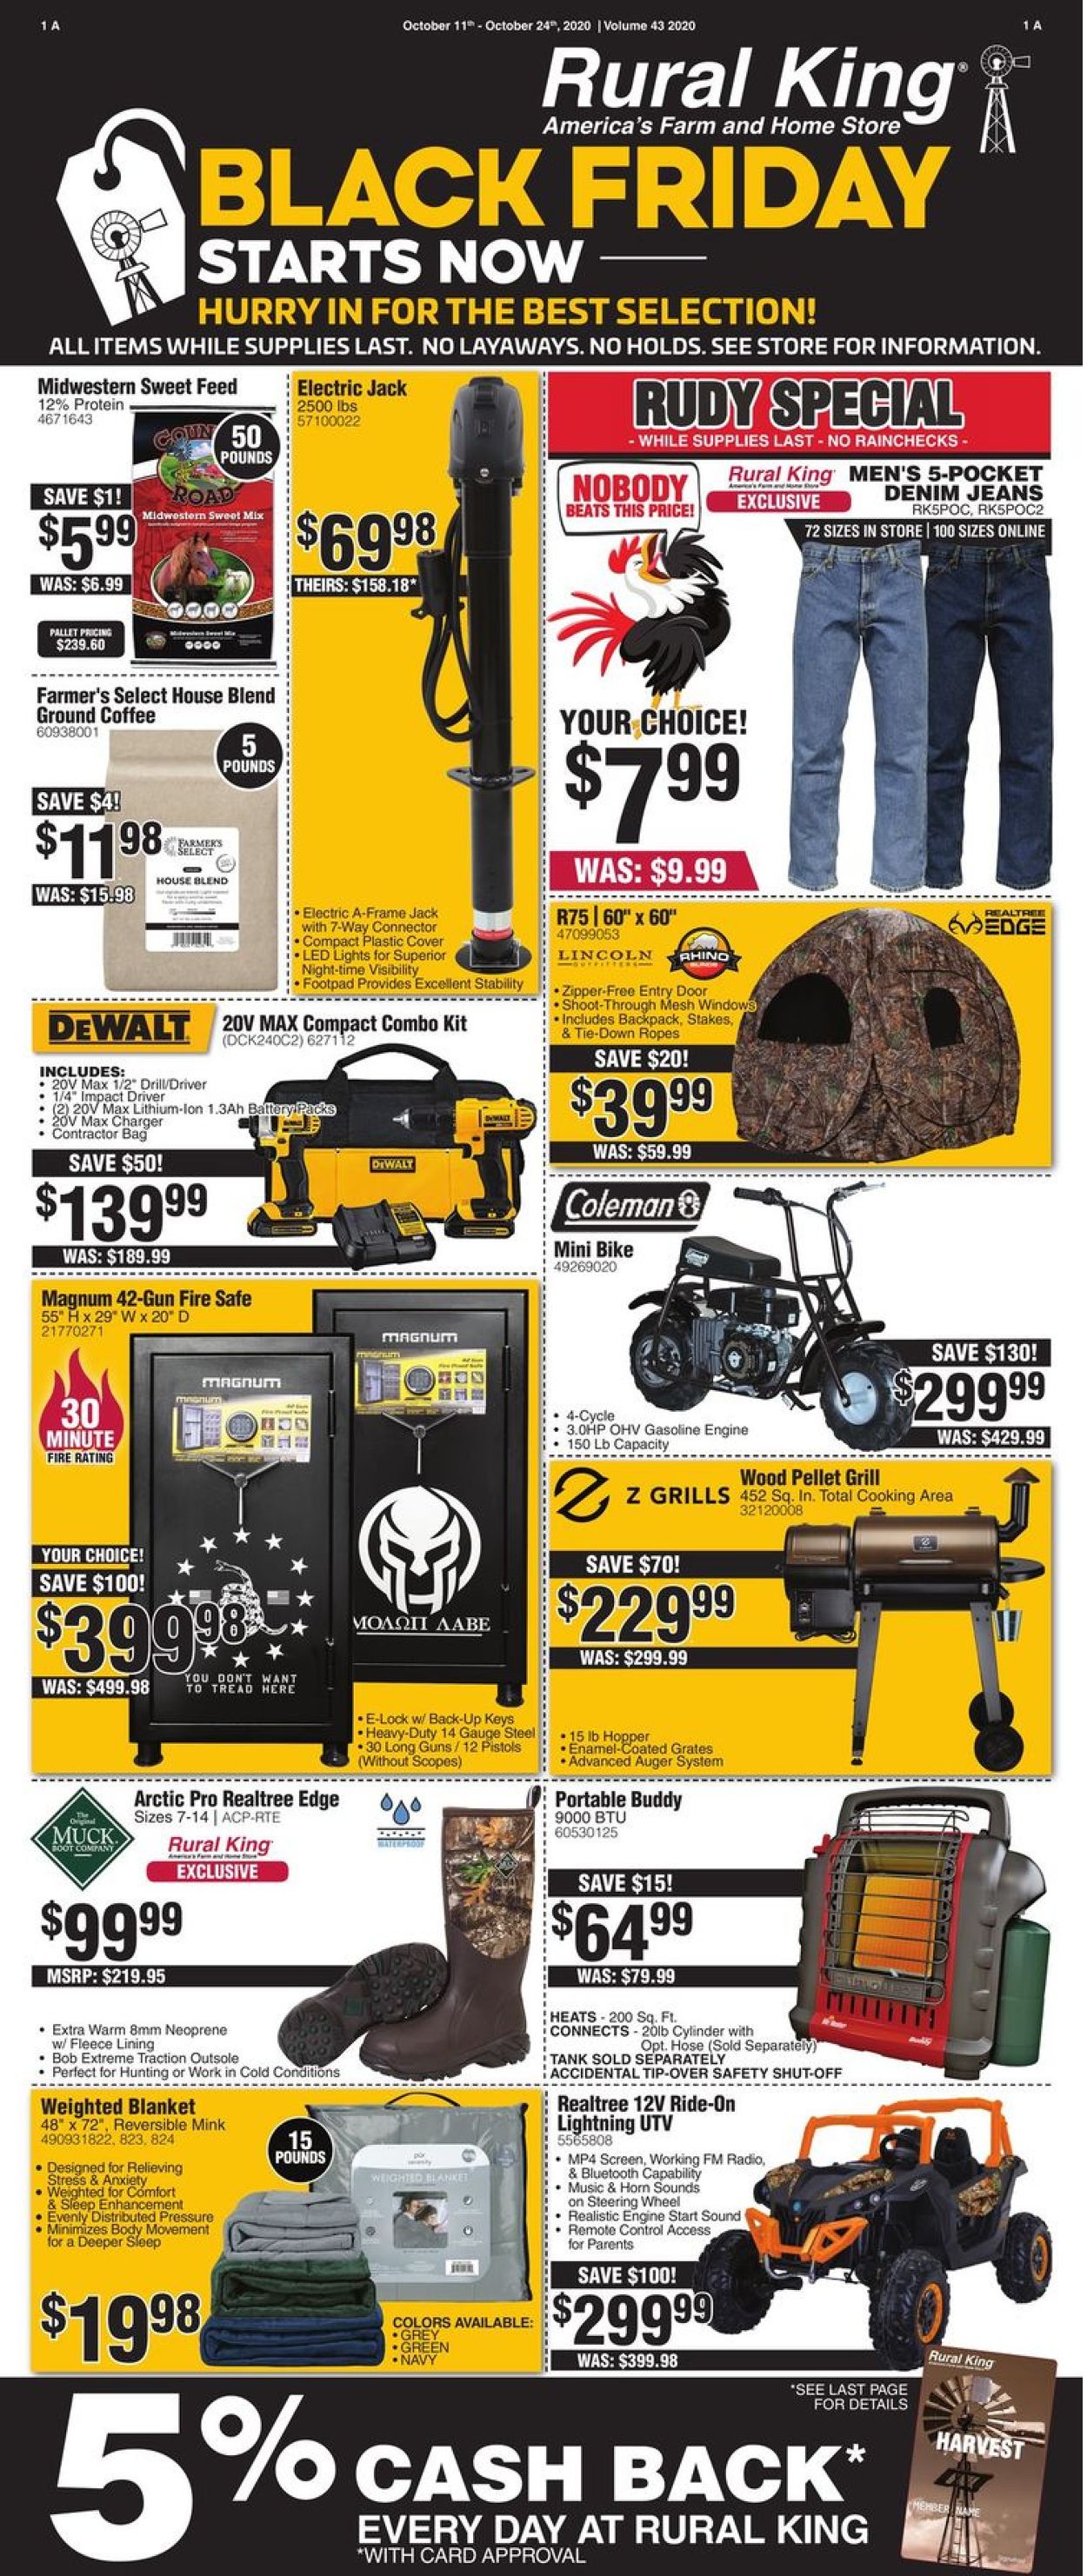 Rural King Black Friday 2020 Current weekly ad 10/11 10/24/2020